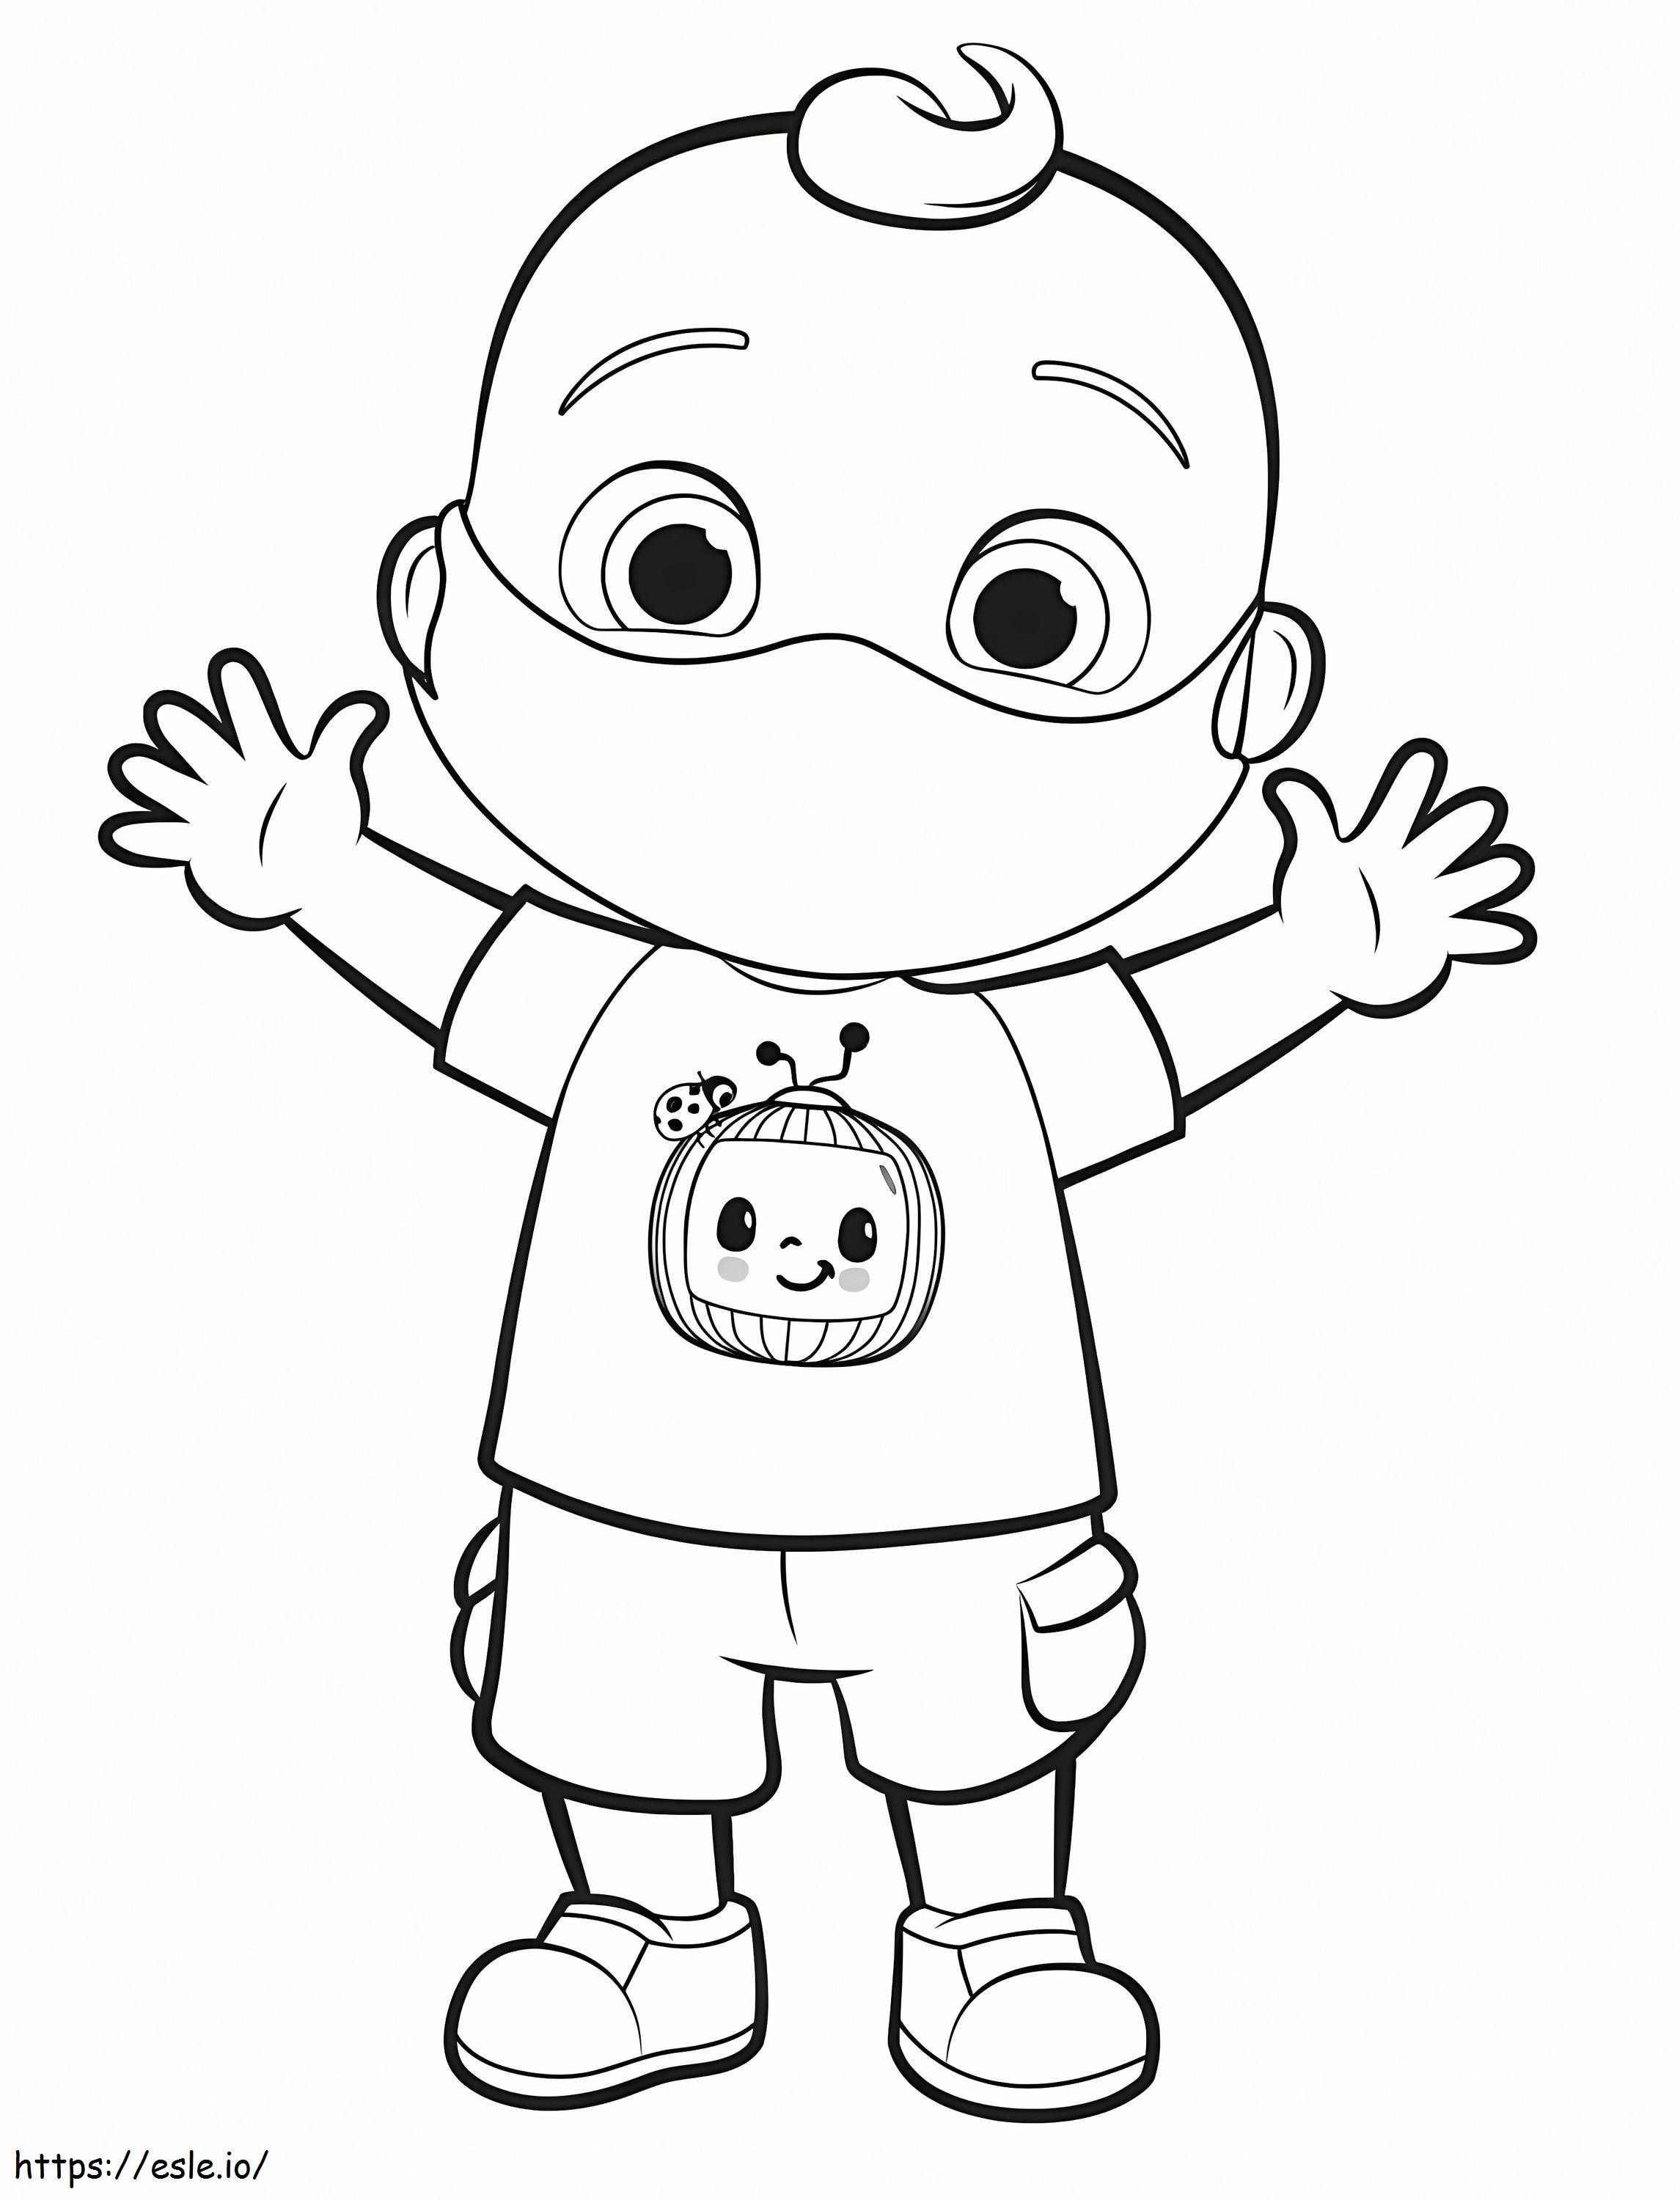 Johnny In Mask coloring page